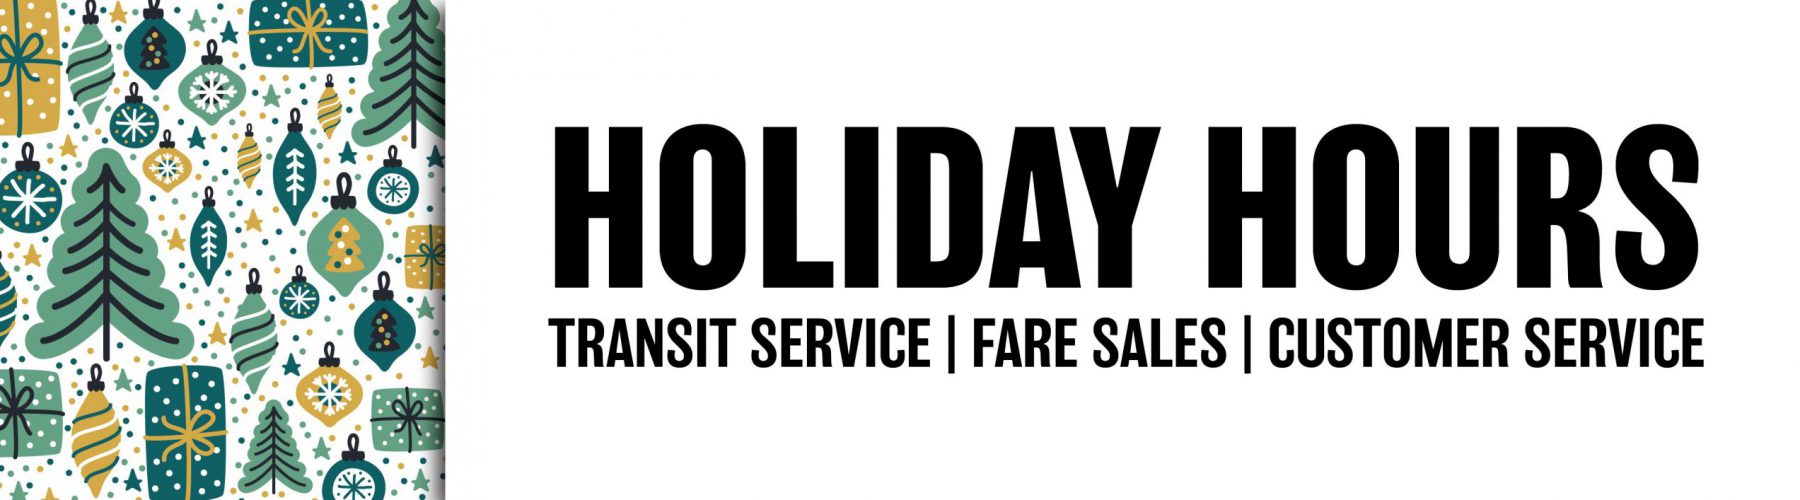 Find out more about the Holiday Hours and Service Levels over this holiday season by clicking here.